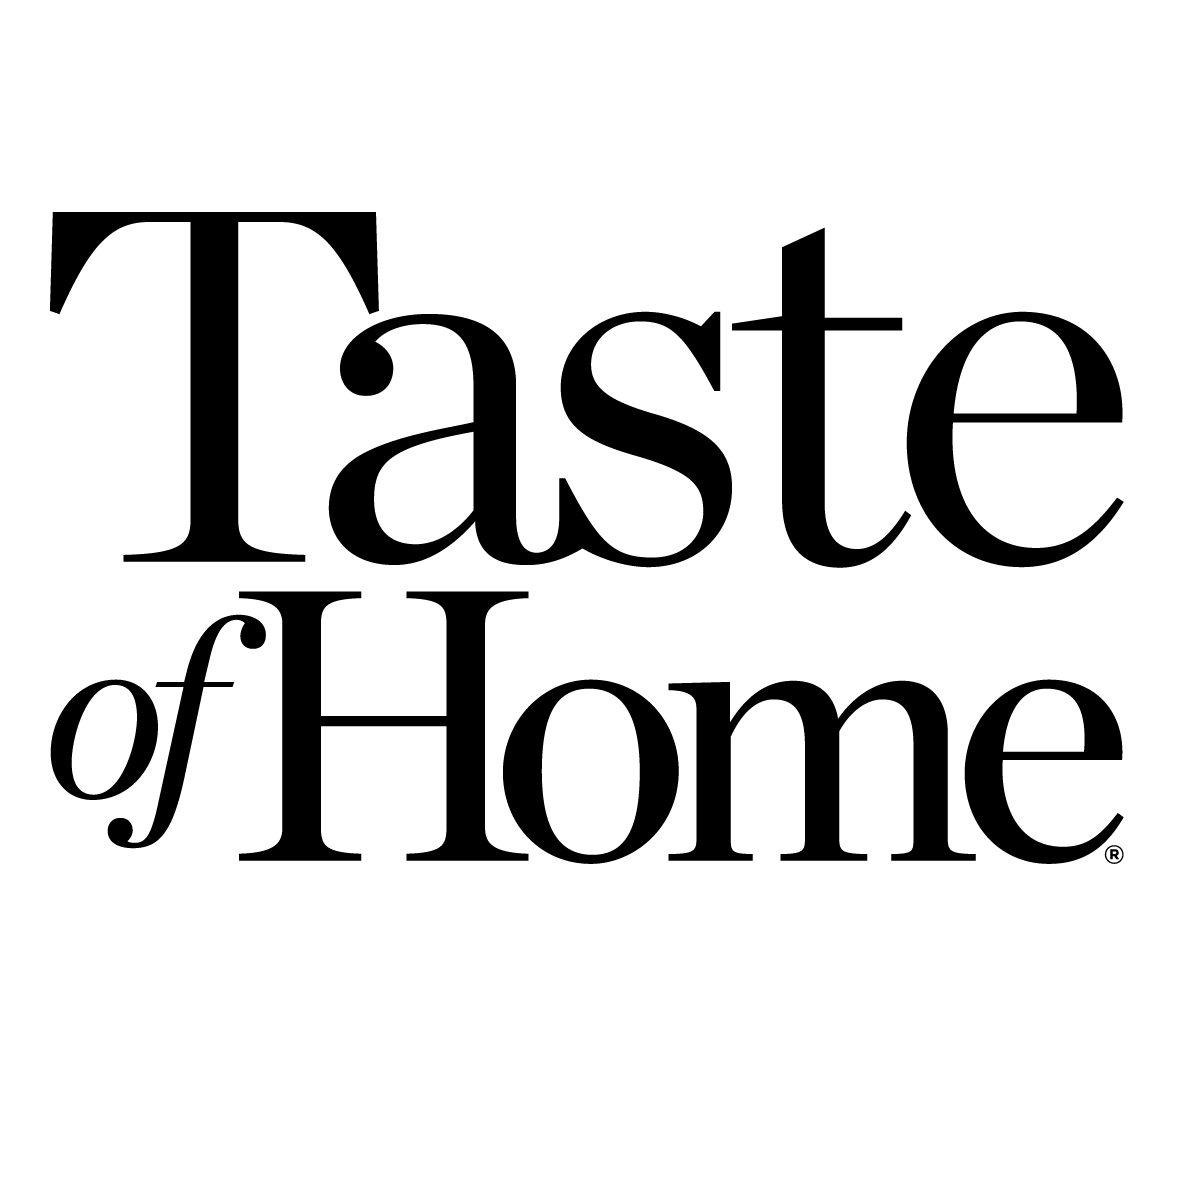 What Chain Has the Best FastFood Burger? Taste of Home